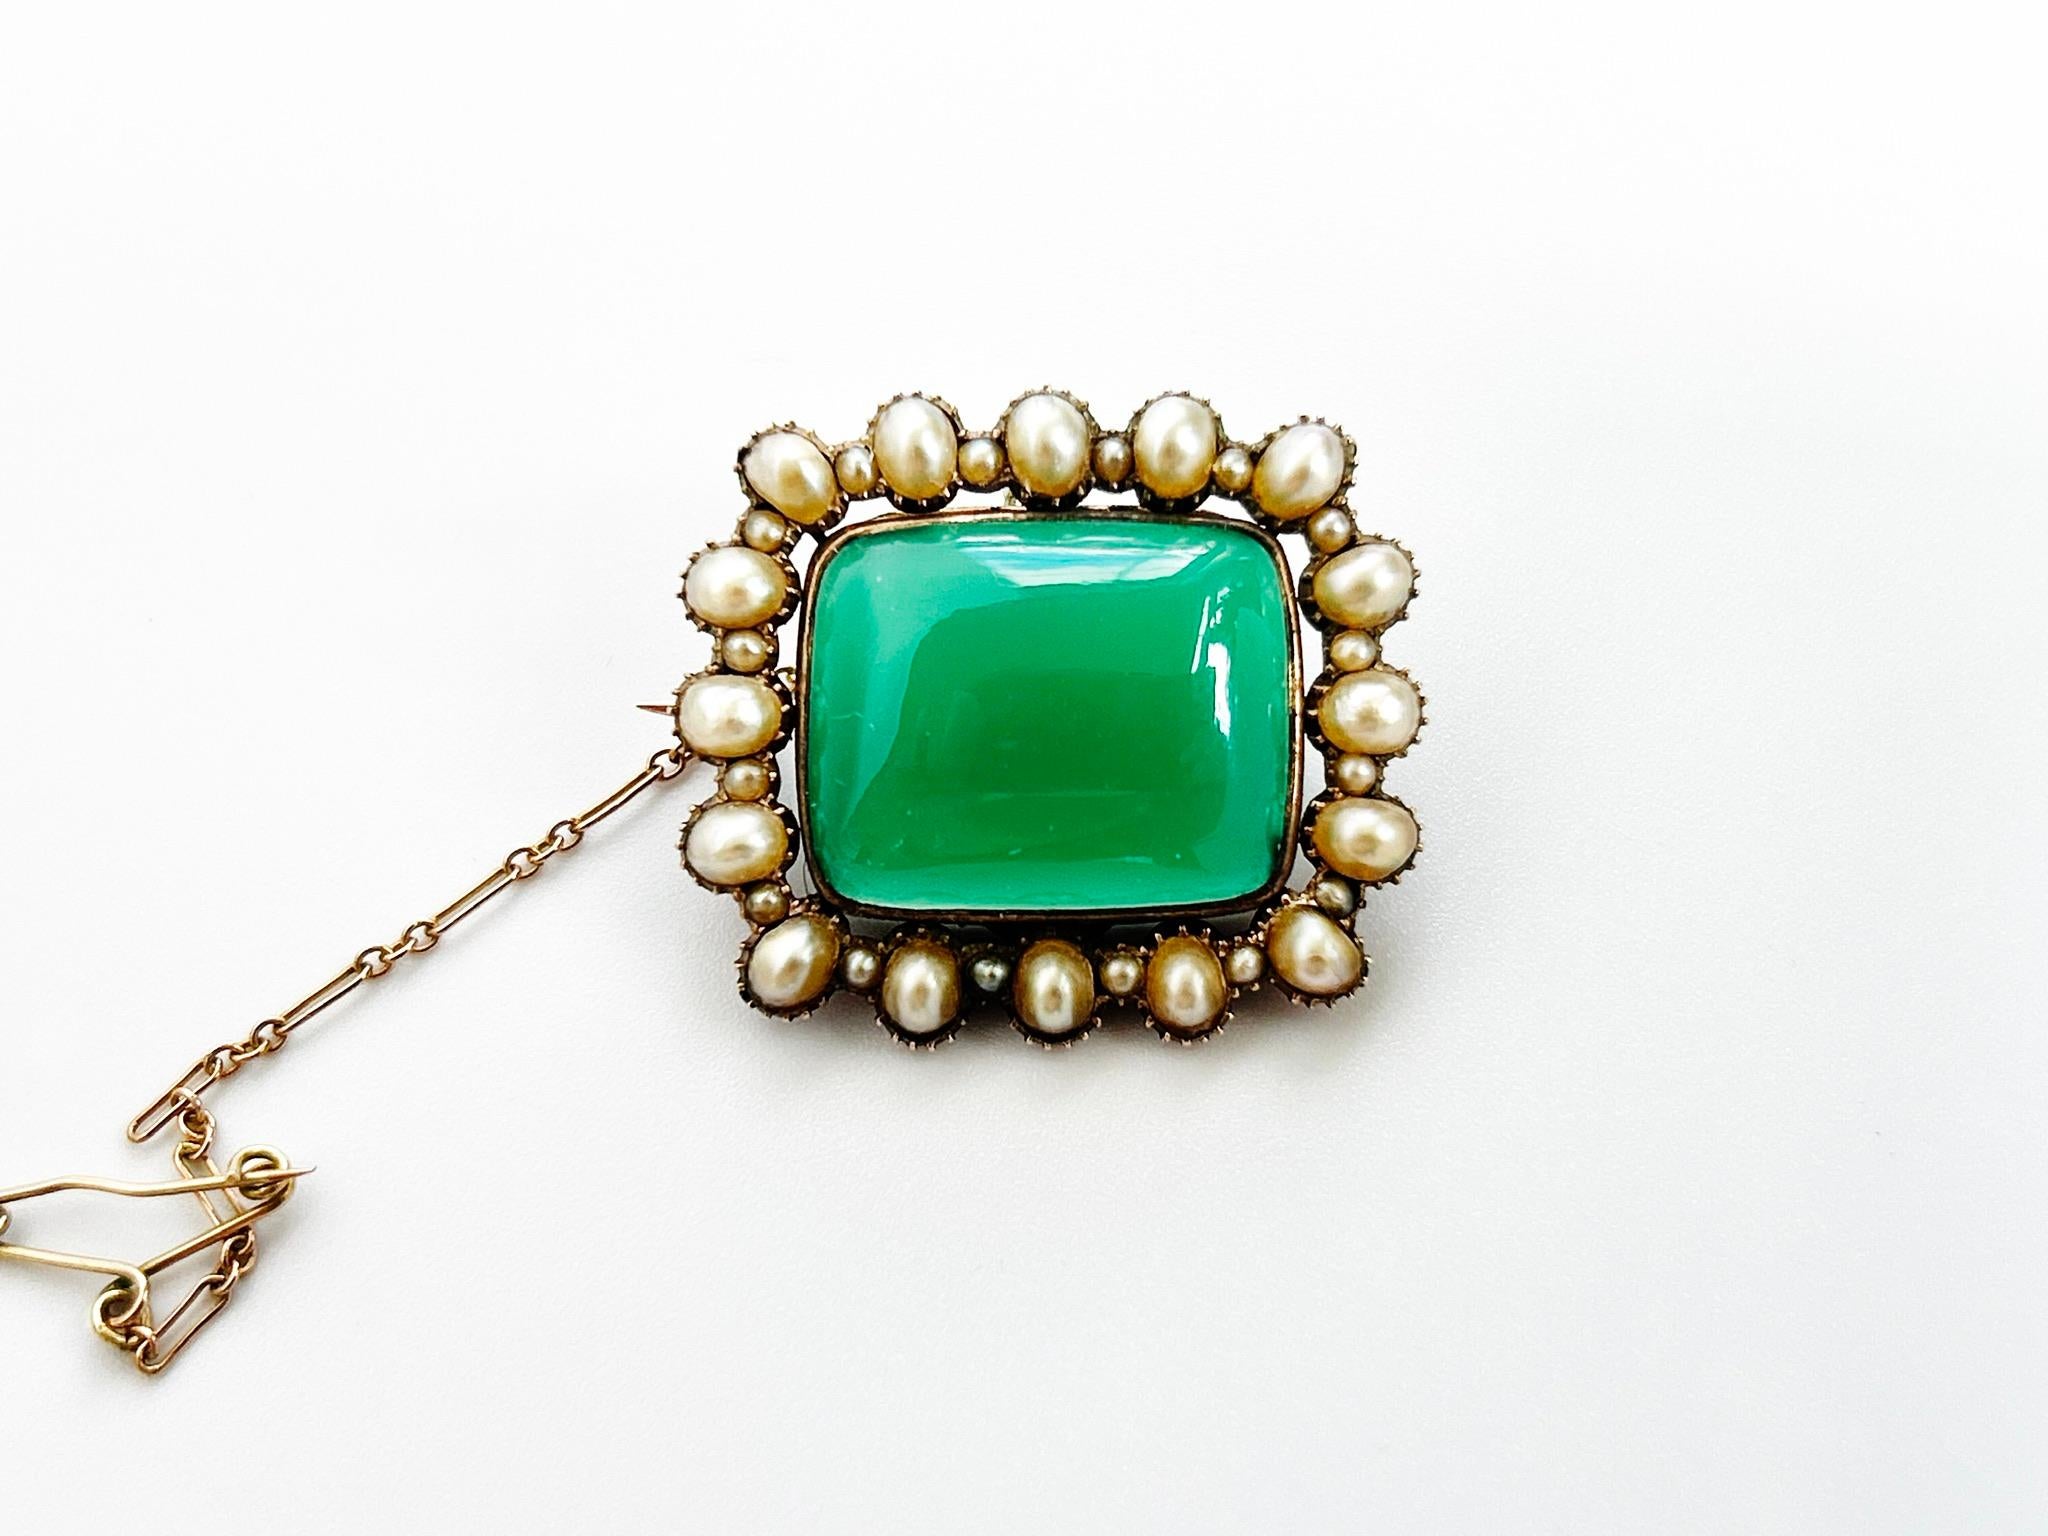 Georgian Chrysoprase and Seed Pearl Pendant/brooch/locket with a rectangular cabochon chrysoprase surrounded by a border of Natural Pearls and seed pearls in gold setting with glazed locket compartment to the reverse, 28mm x 25mm.